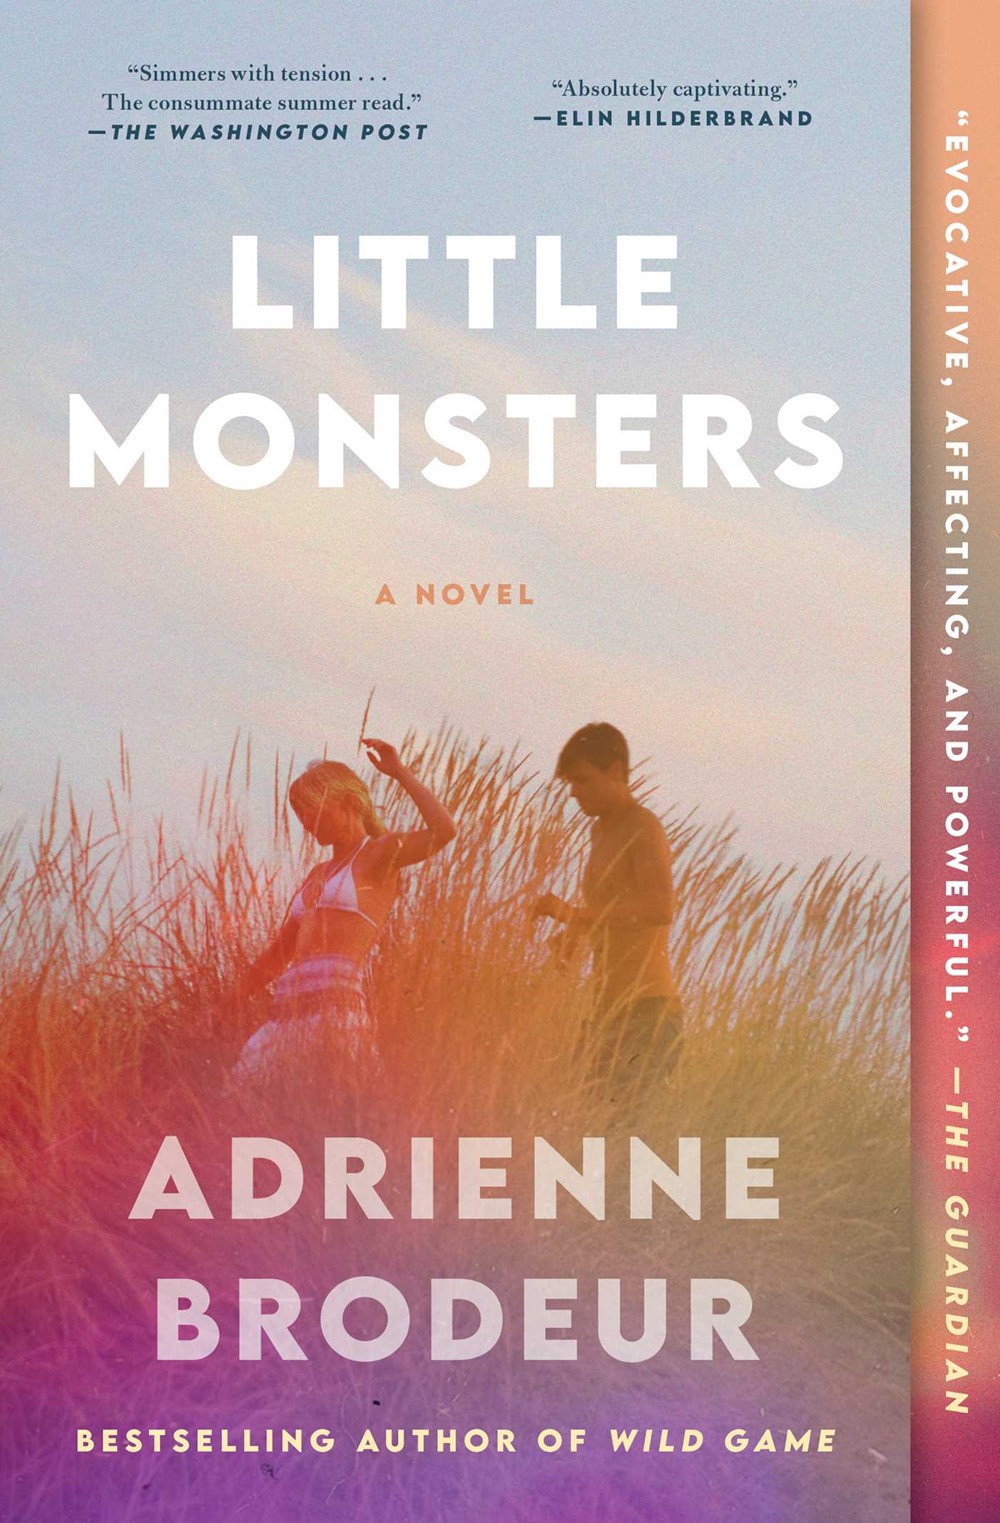 Little-Monsters-paperback-book-cover